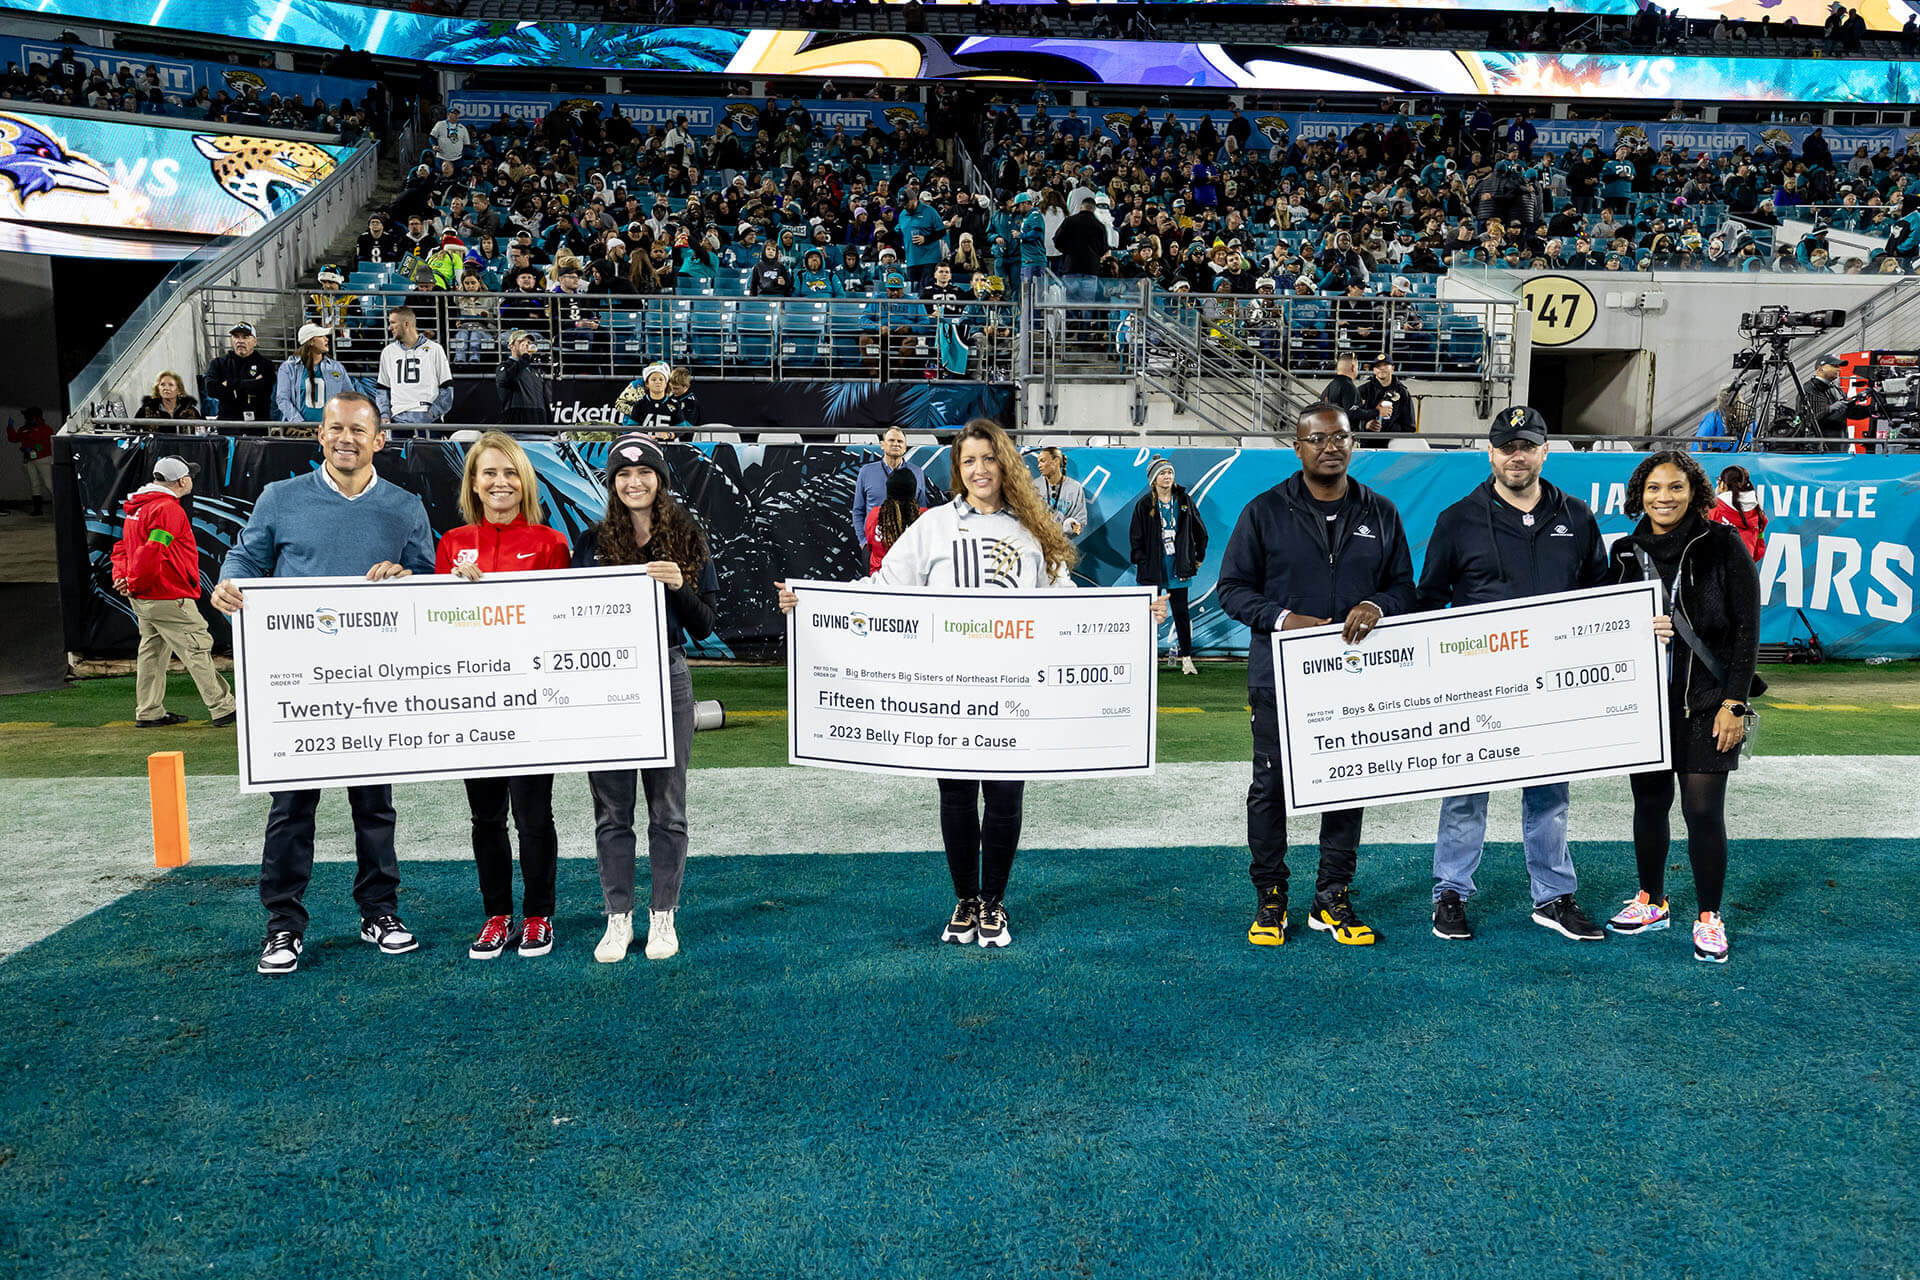 Giving Tuesday with the Jacksonville Jaguars